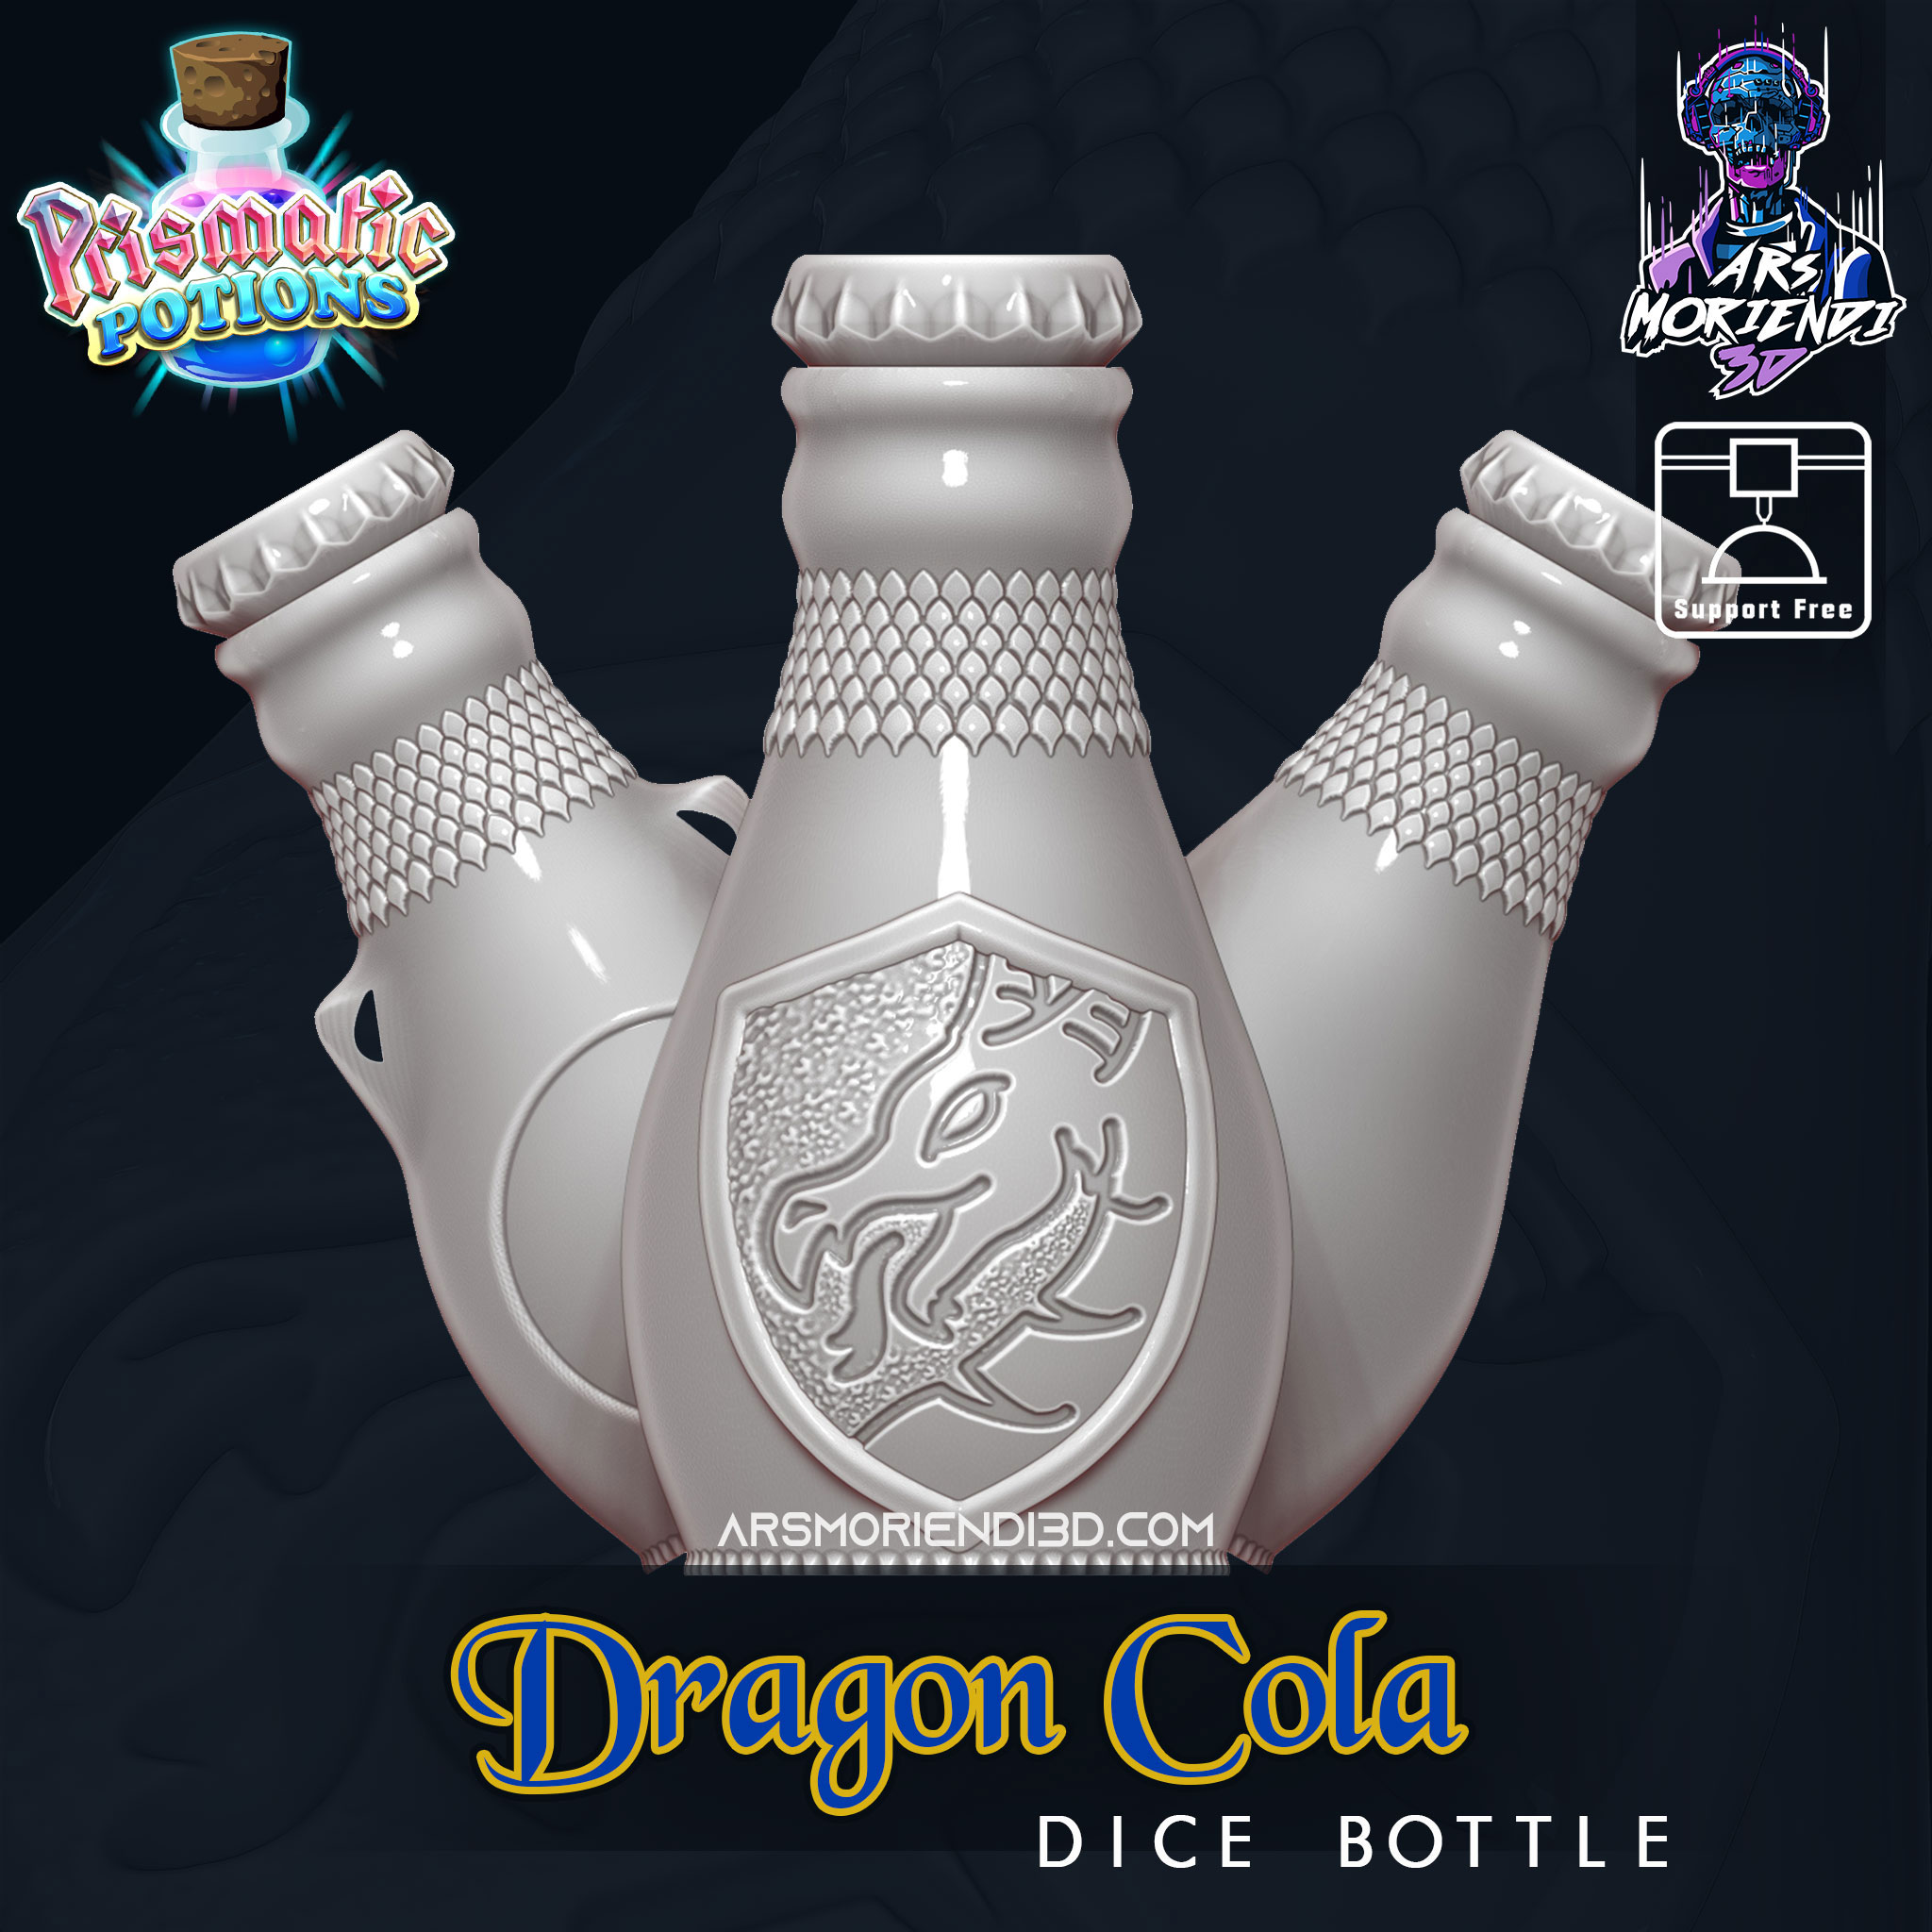 Dragon Cola Dice Bottle - Mythic Potions